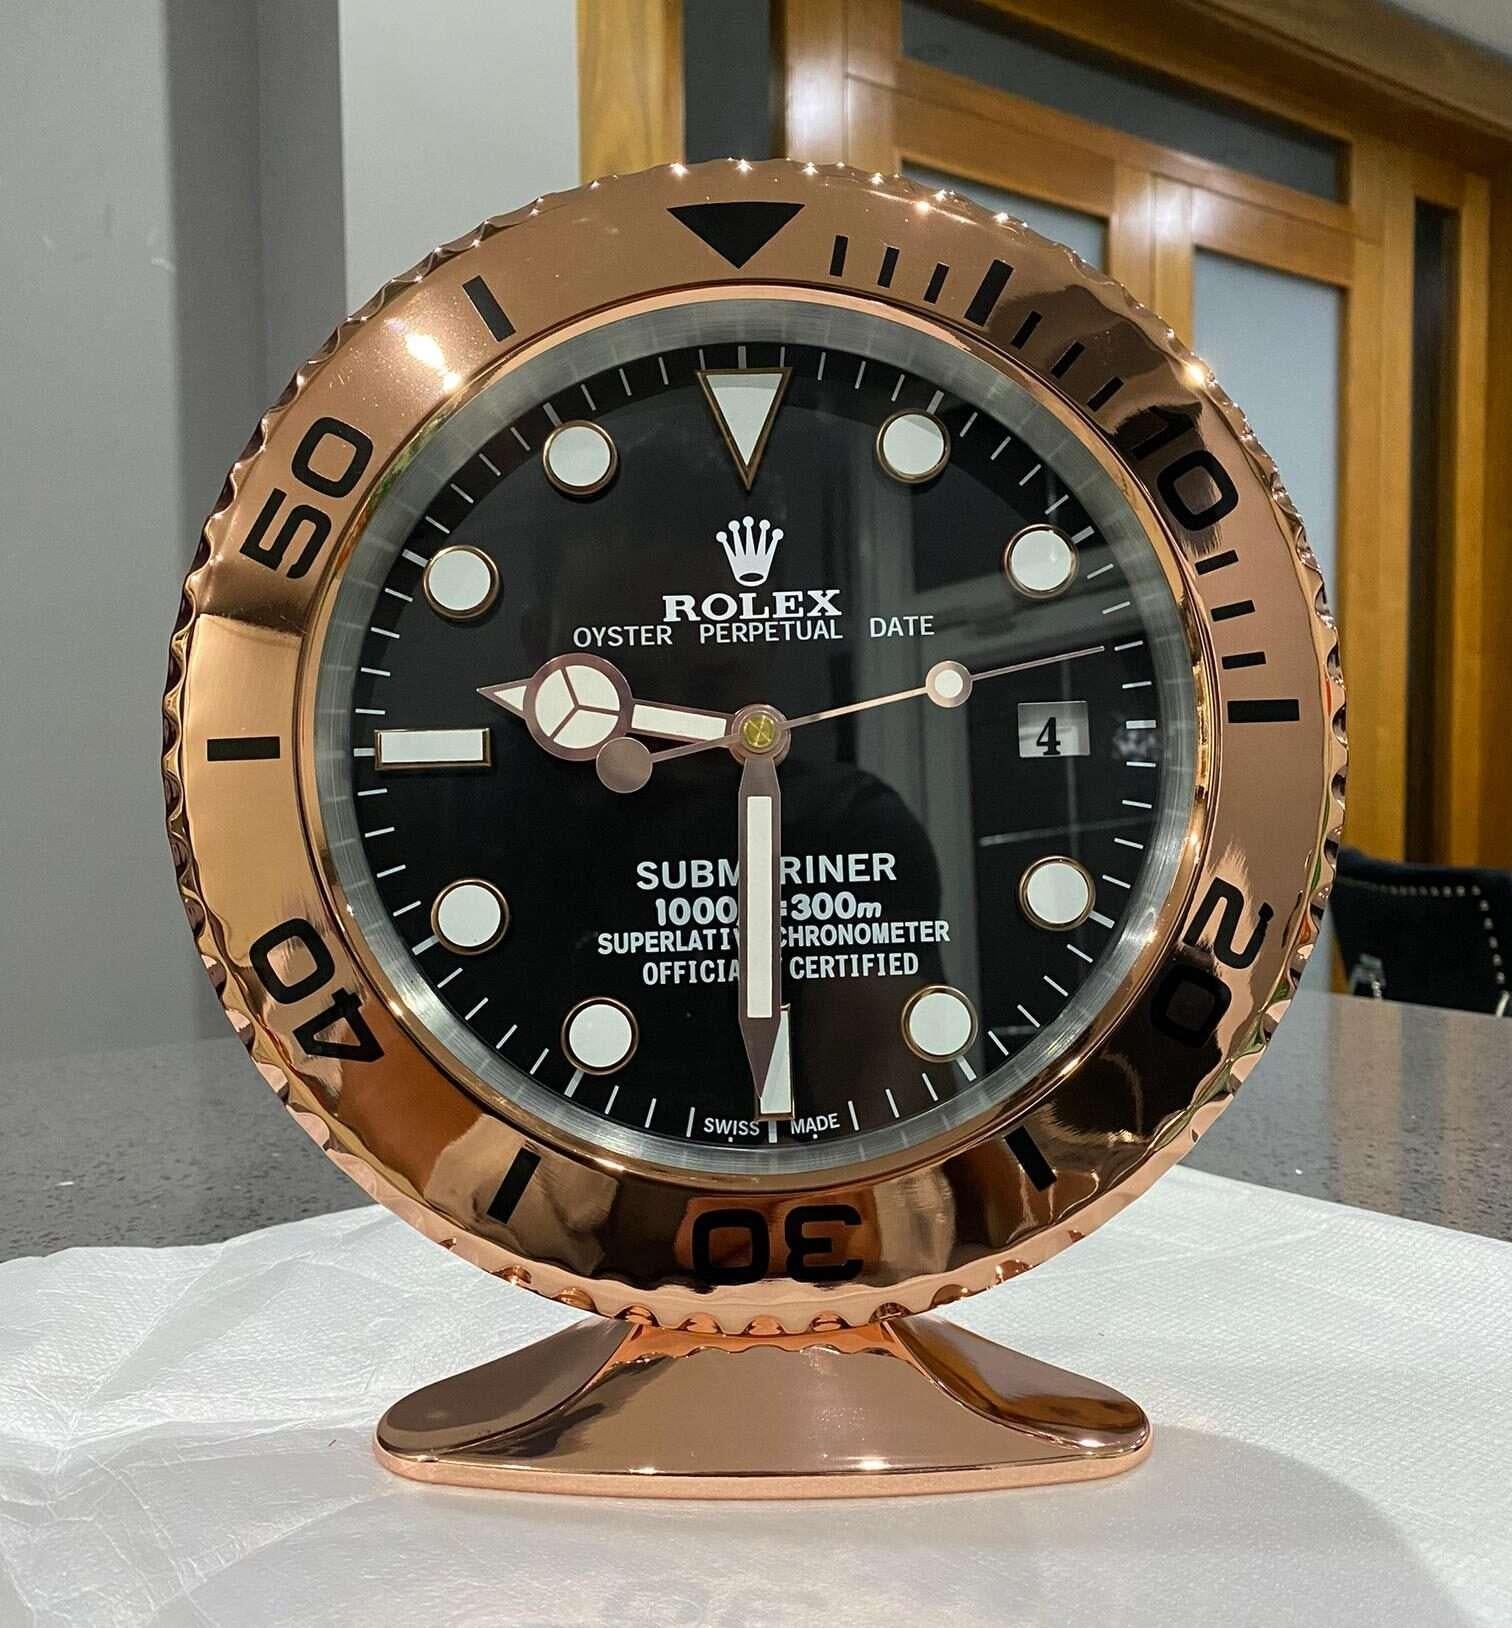 ROLEX Officially Certified Oyster Perpetual Submariner Rose Chrome Desk Clock 
Luminous hands.
Fully functional date.
Sweeping hands.
Quartz movement.
Good condition, working.
Free international shipping.